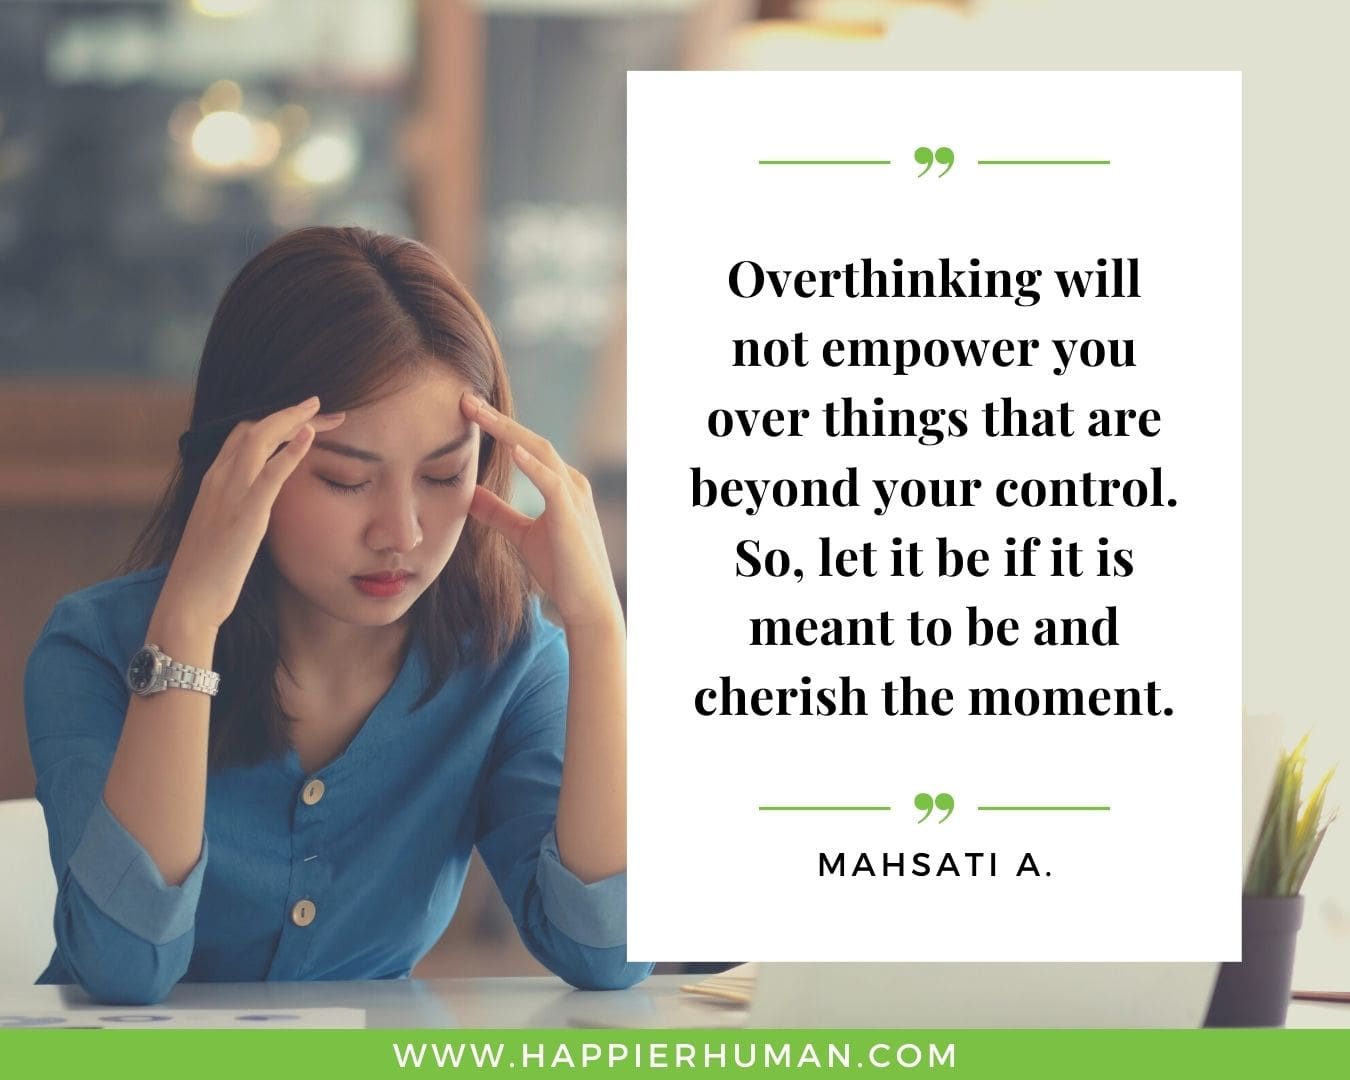 Overthinking Quotes - "Overthinking will not empower you over things that are beyond your control. So, let it be if it is meant to be and cherish the moment." - Mahsati A.